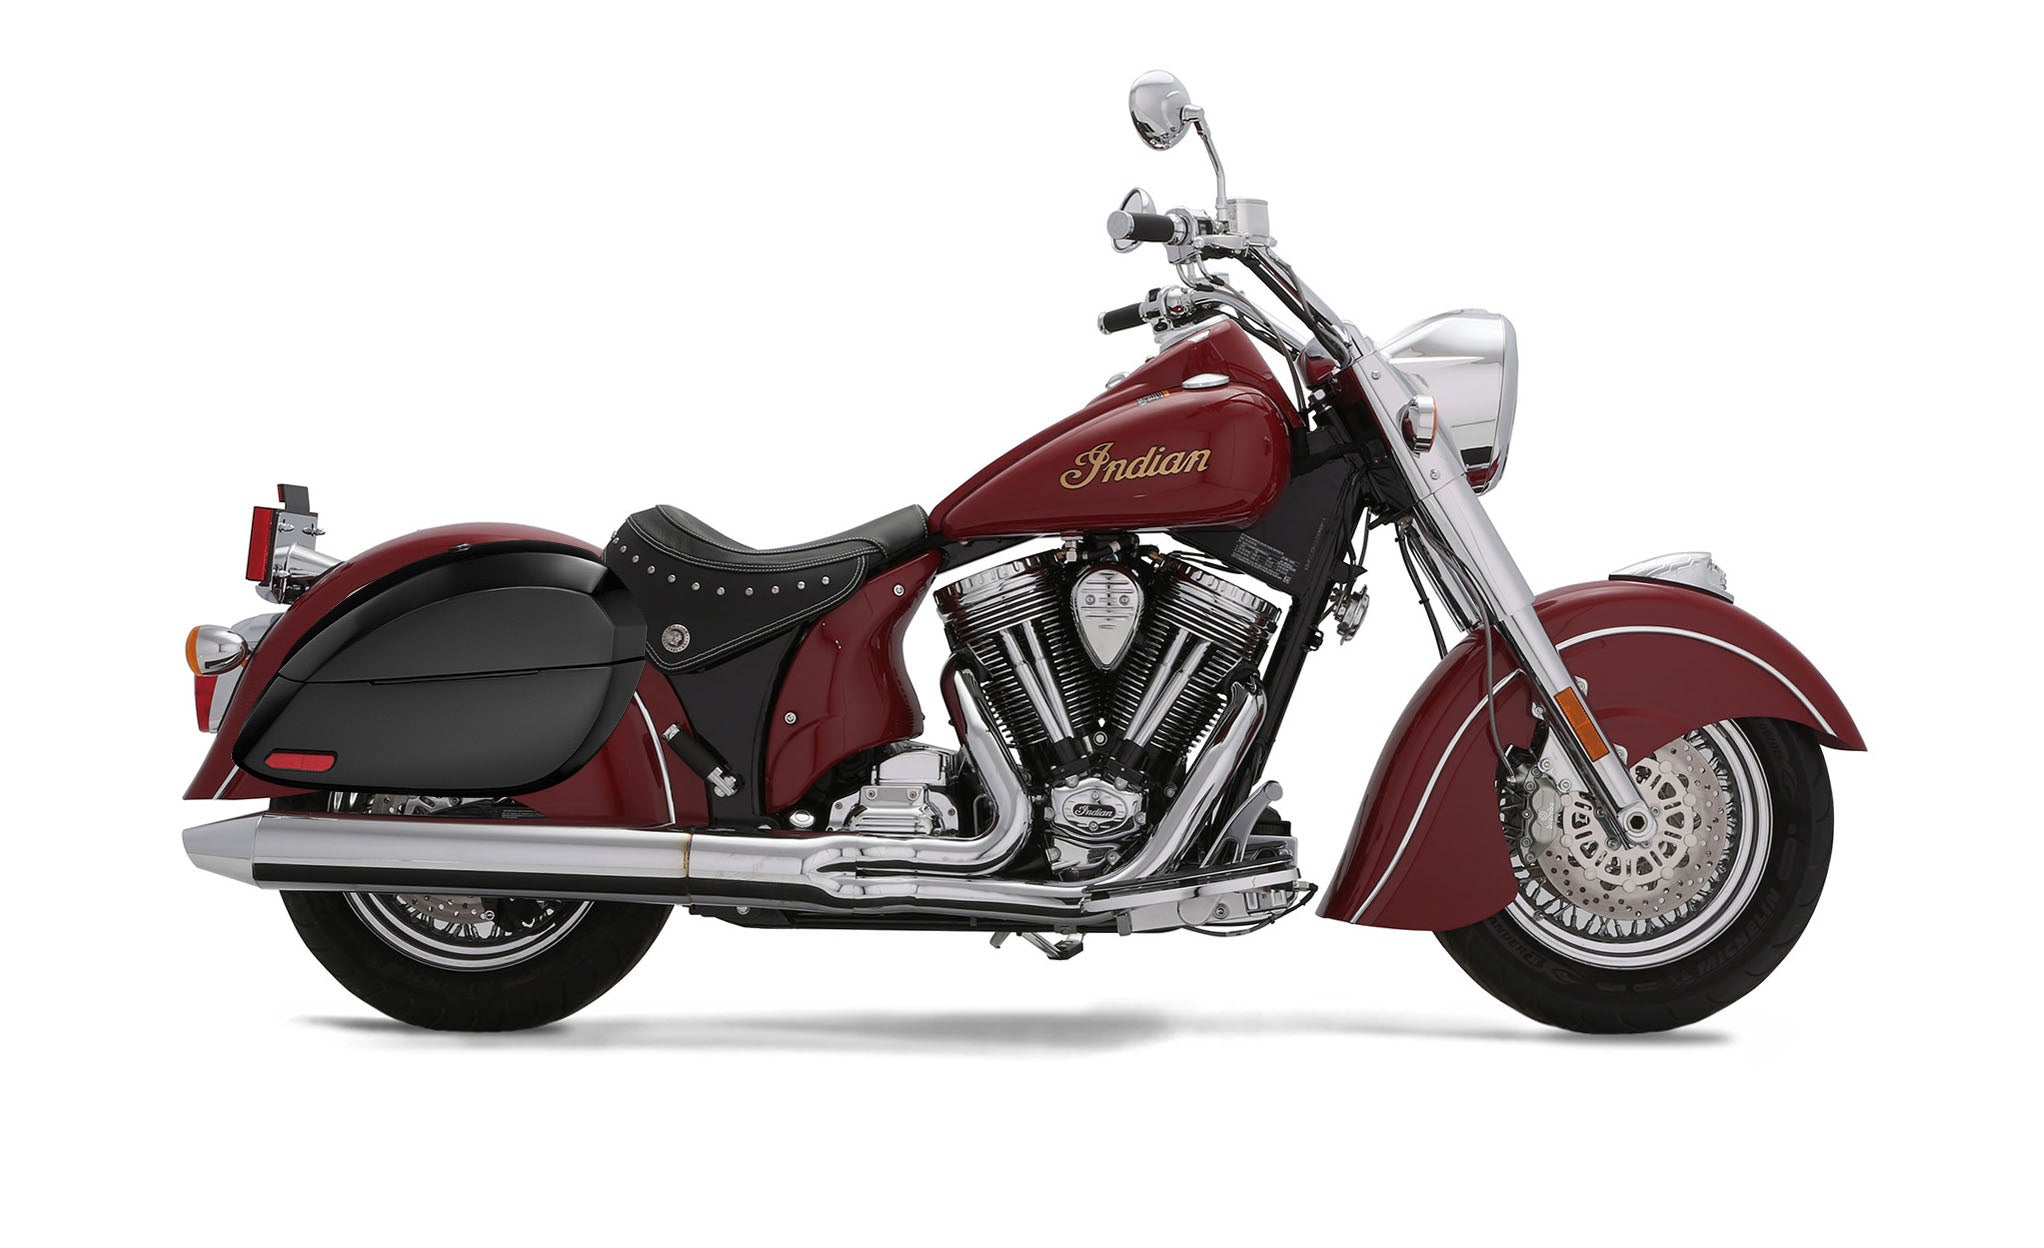 Viking Phantom Large Indian Chief Deluxe Painted Motorcycle Hard Saddlebags Engineering Excellence with Bag on Bike @expand